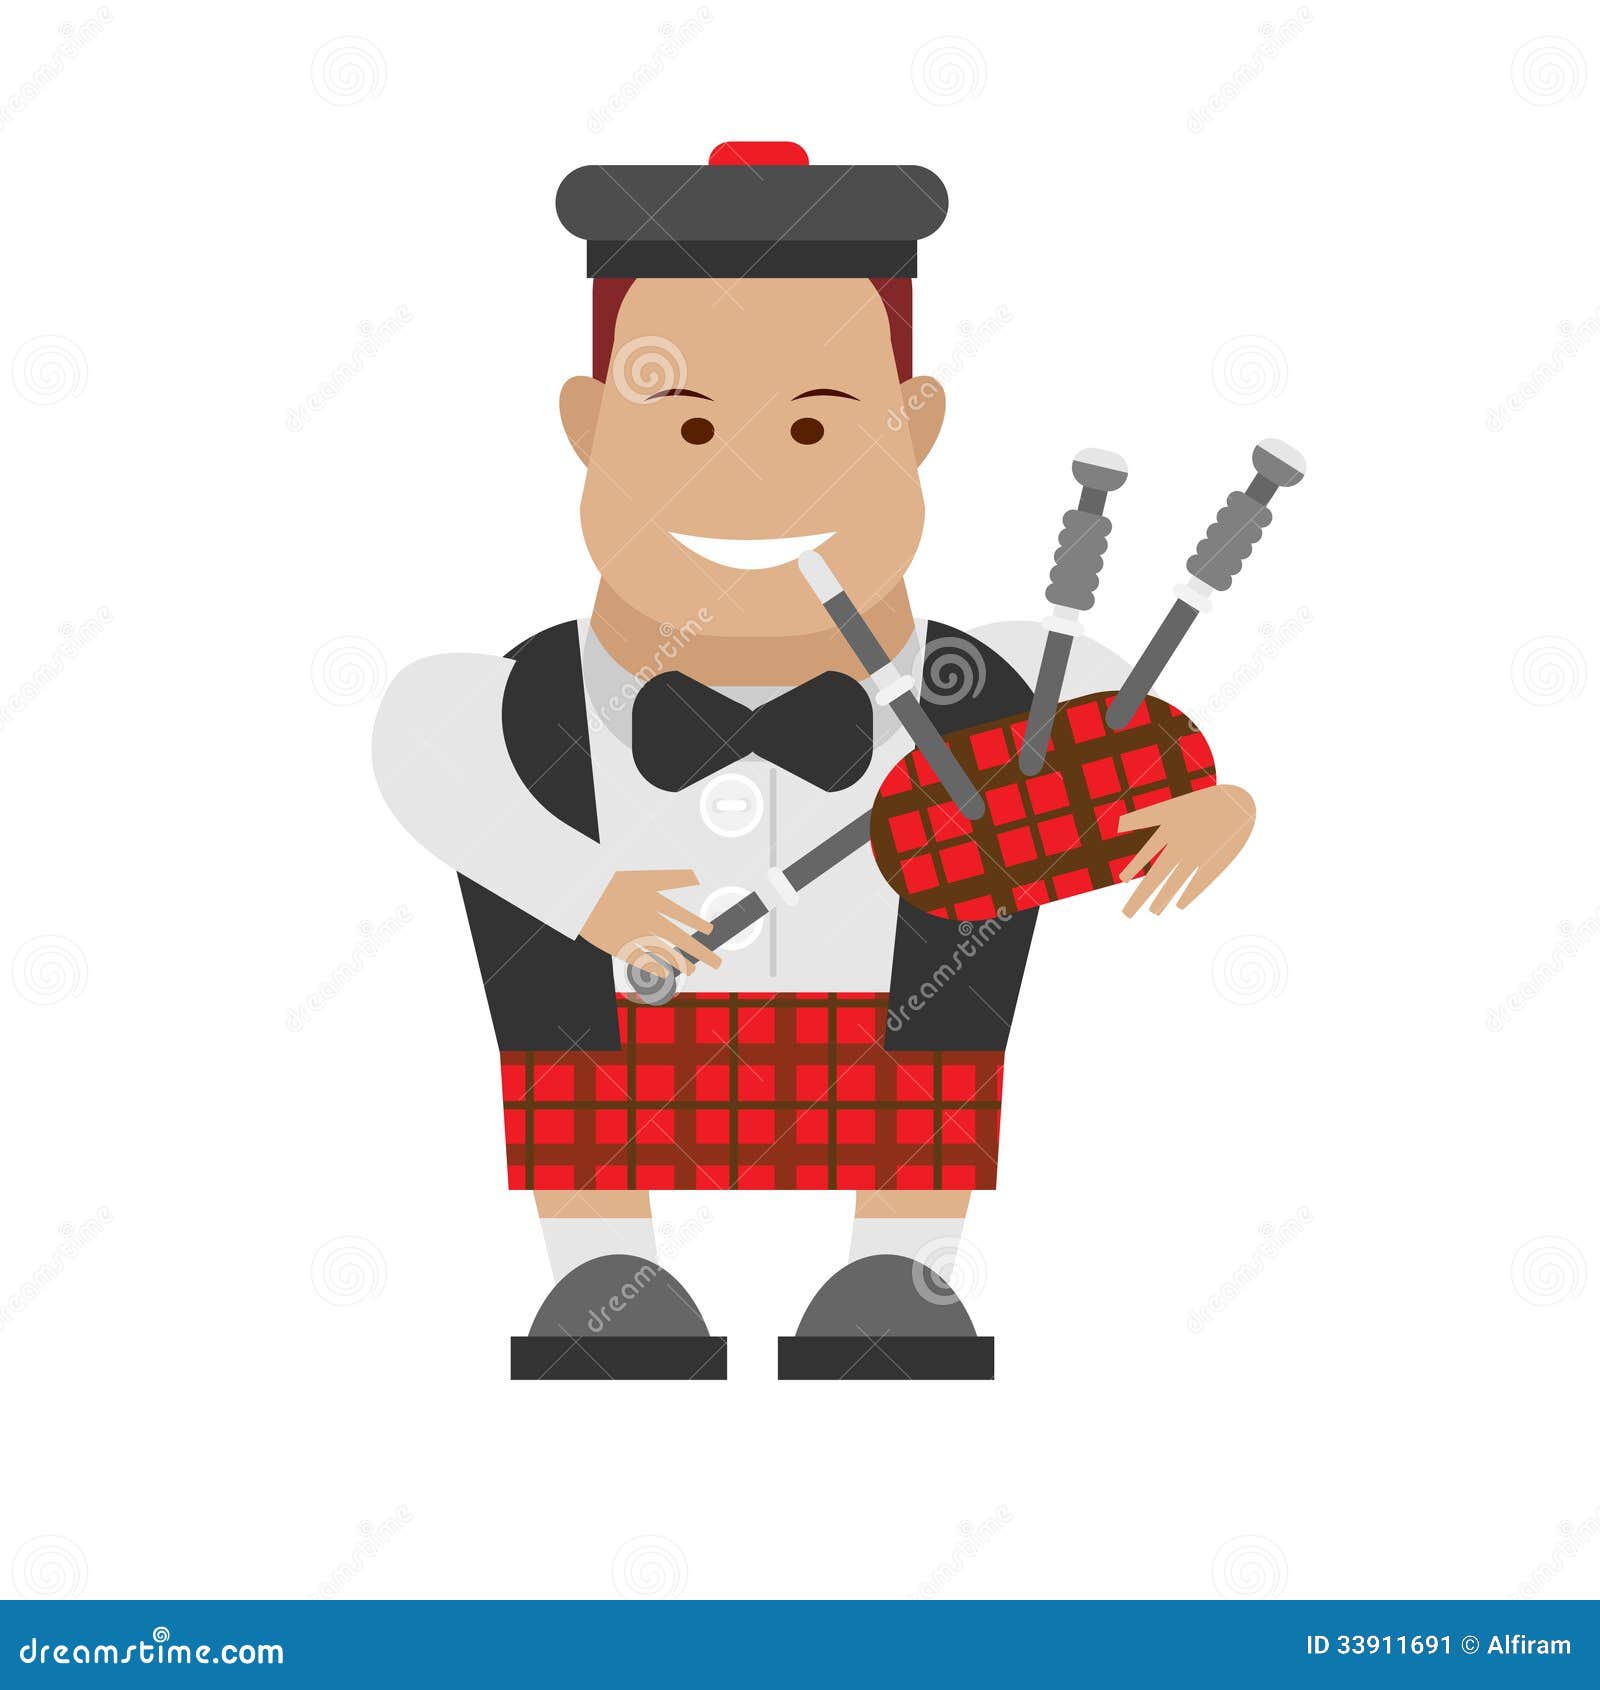 bagpipe clipart - photo #35